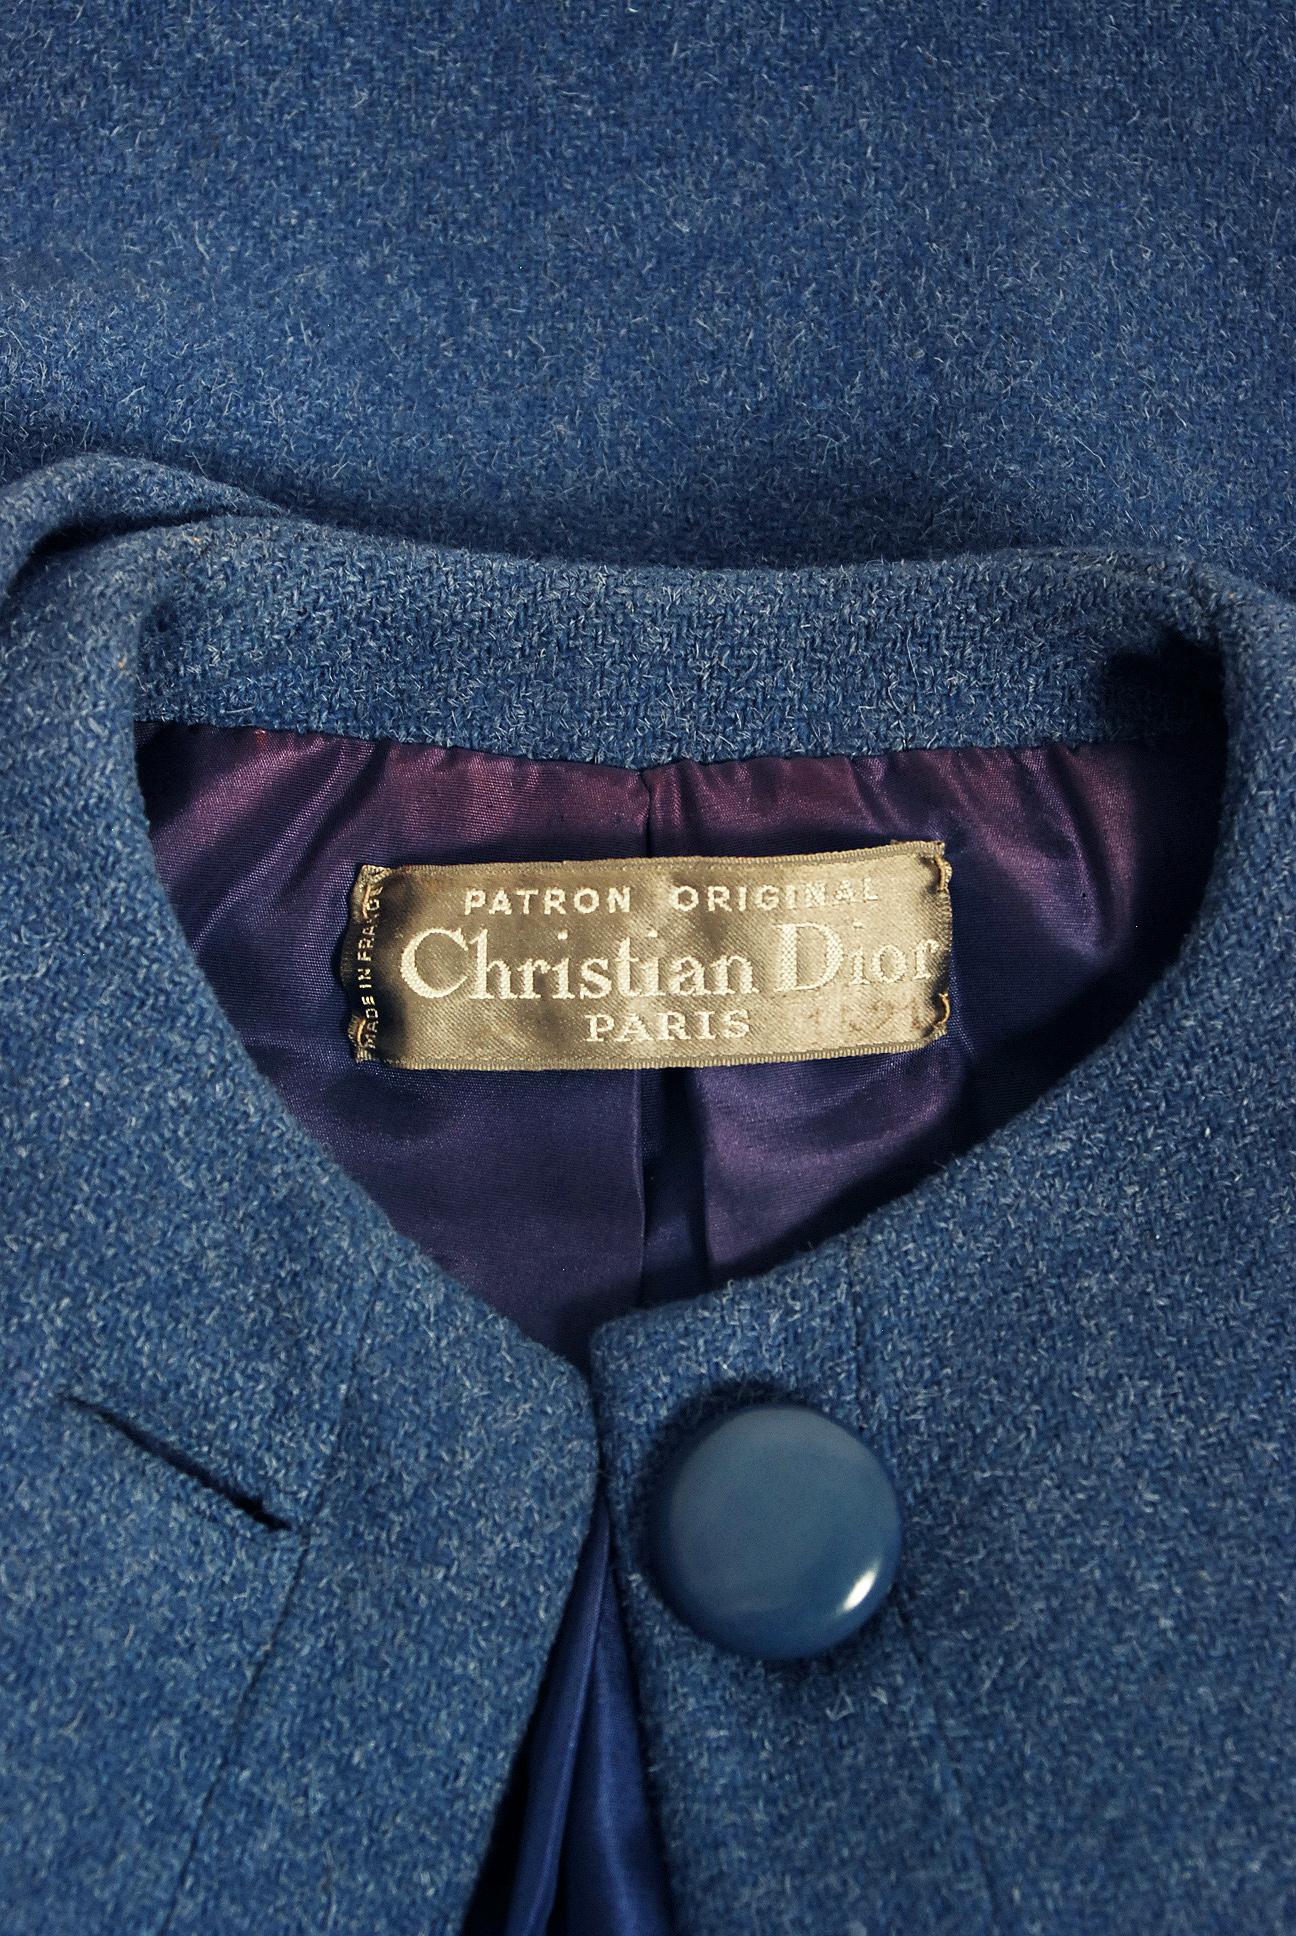 Vintage 1958 Yves Saint Laurent for Christian Dior Couture Documented Blue Coat 1